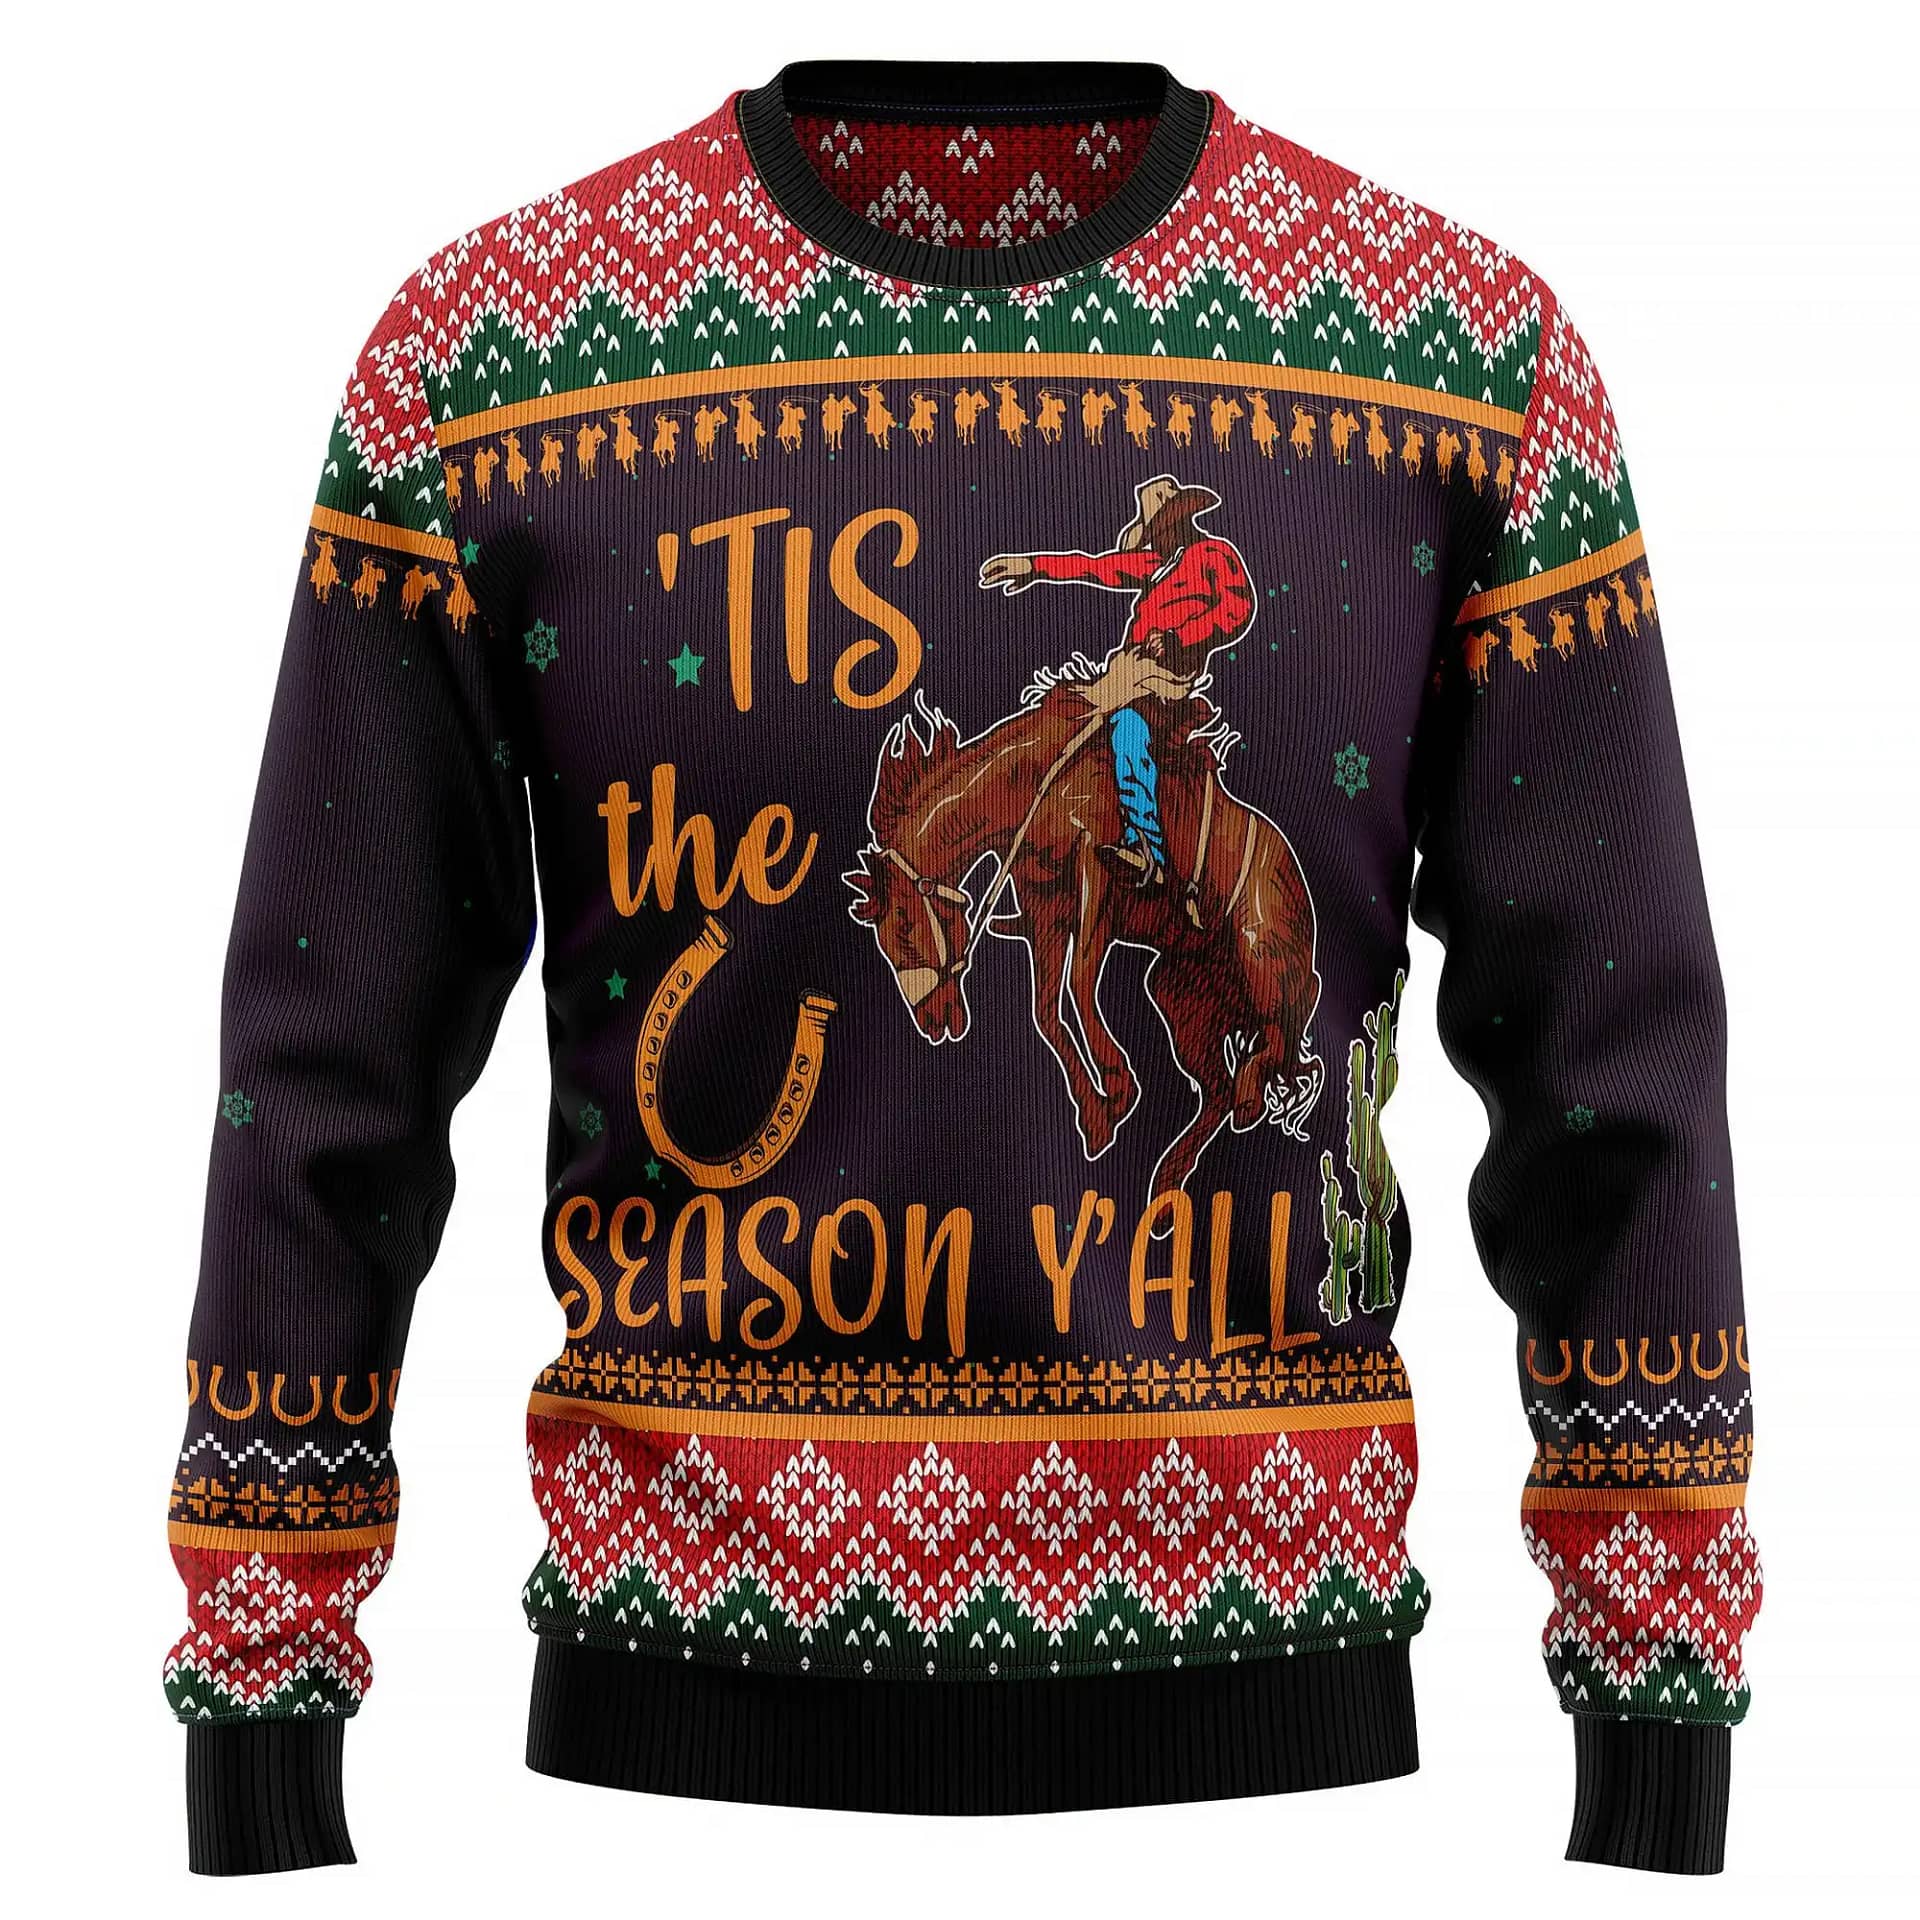 Cowboy Season Knitted Xmas Best Holiday Gifts Ugly Sweater